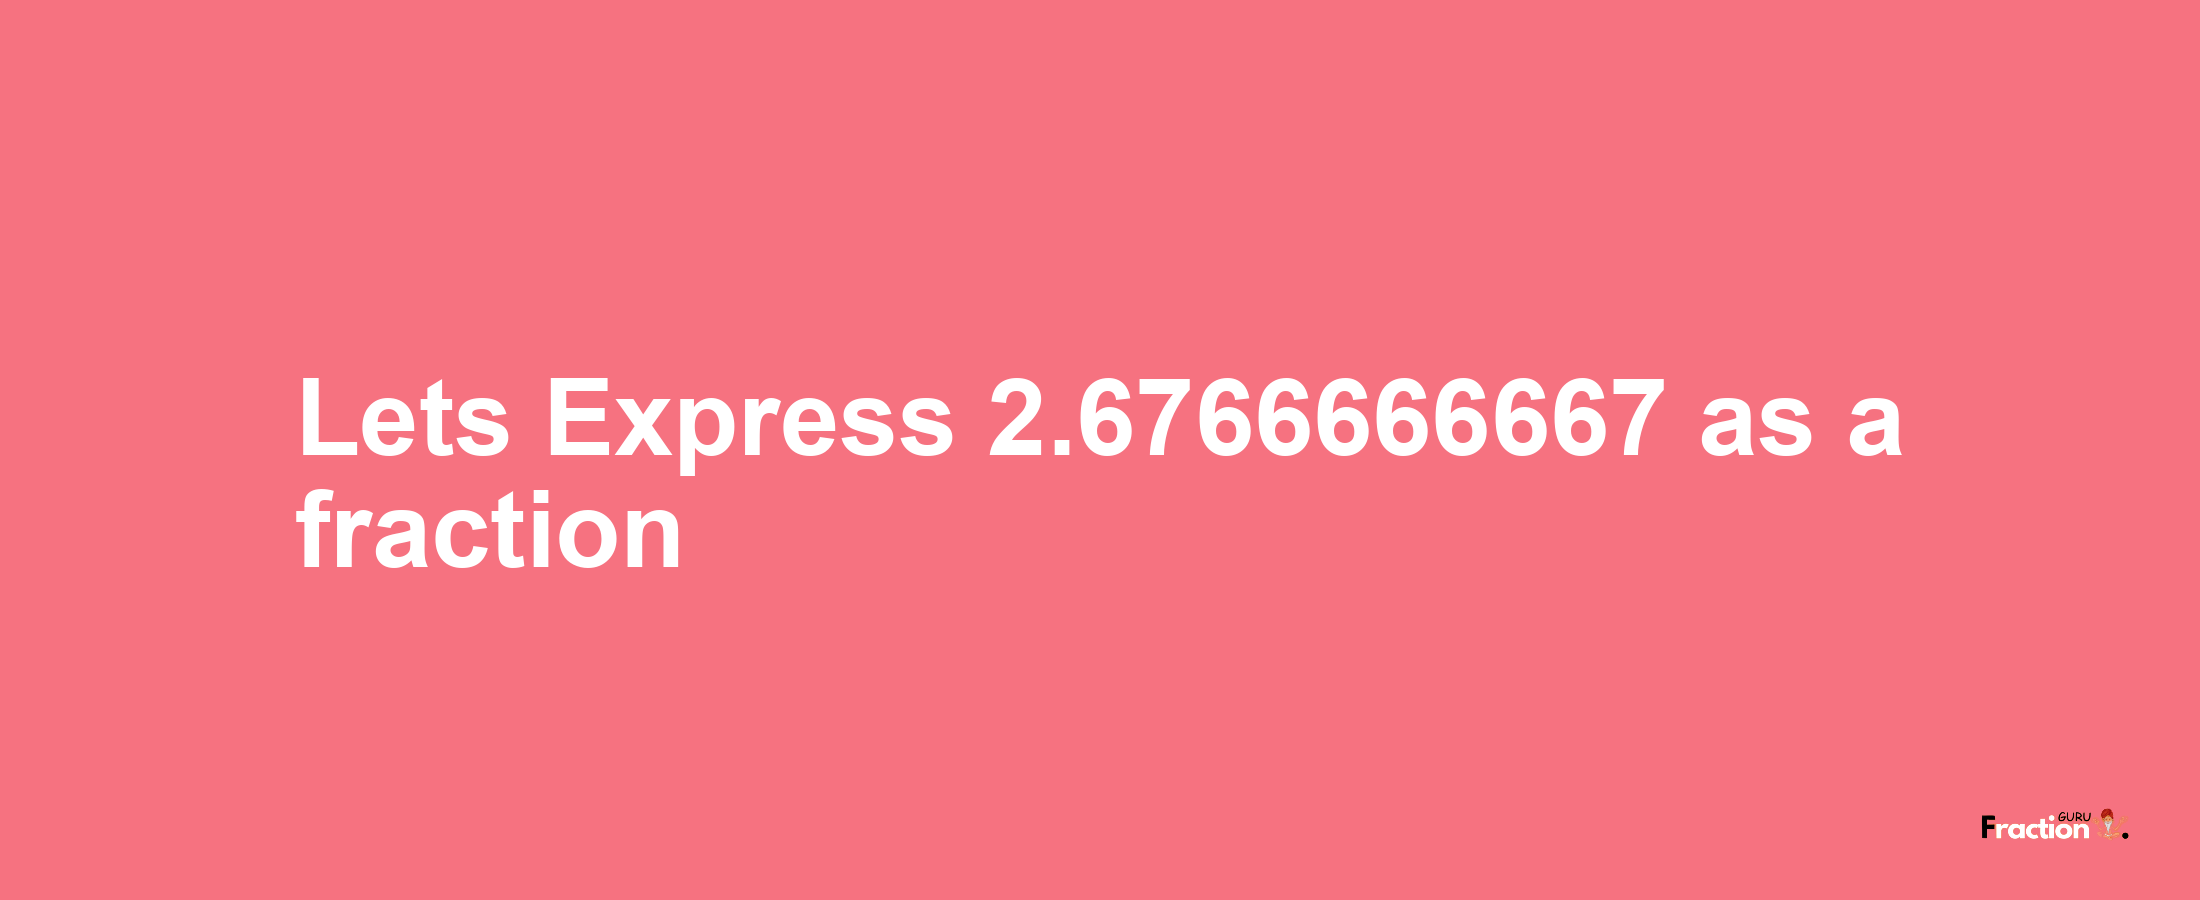 Lets Express 2.6766666667 as afraction